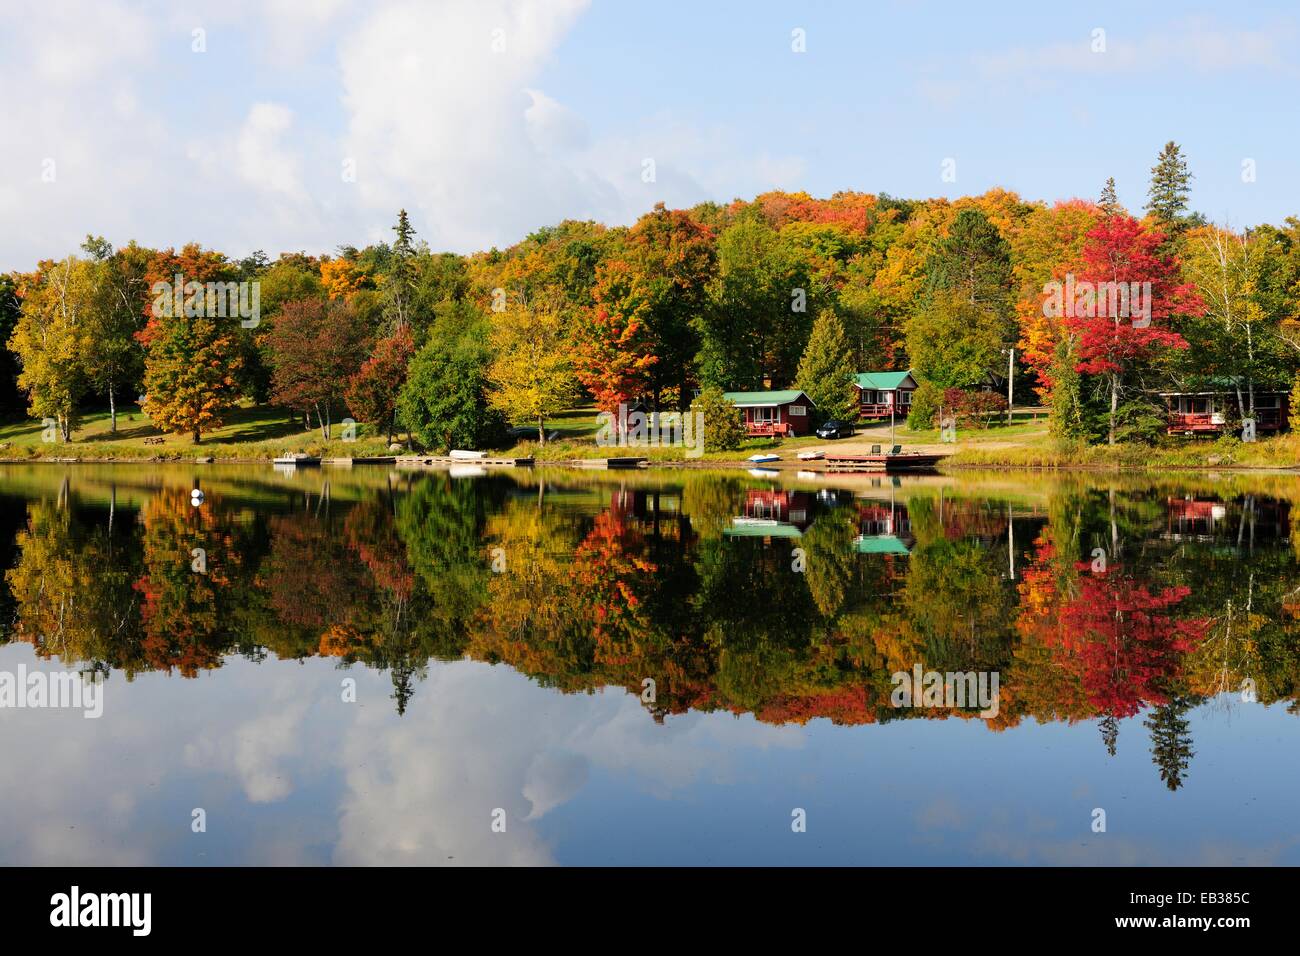 Forest in autumn colours and houses reflected in Galeairy Lake, typical lake and forest landscape of the Canadian Shield Stock Photo